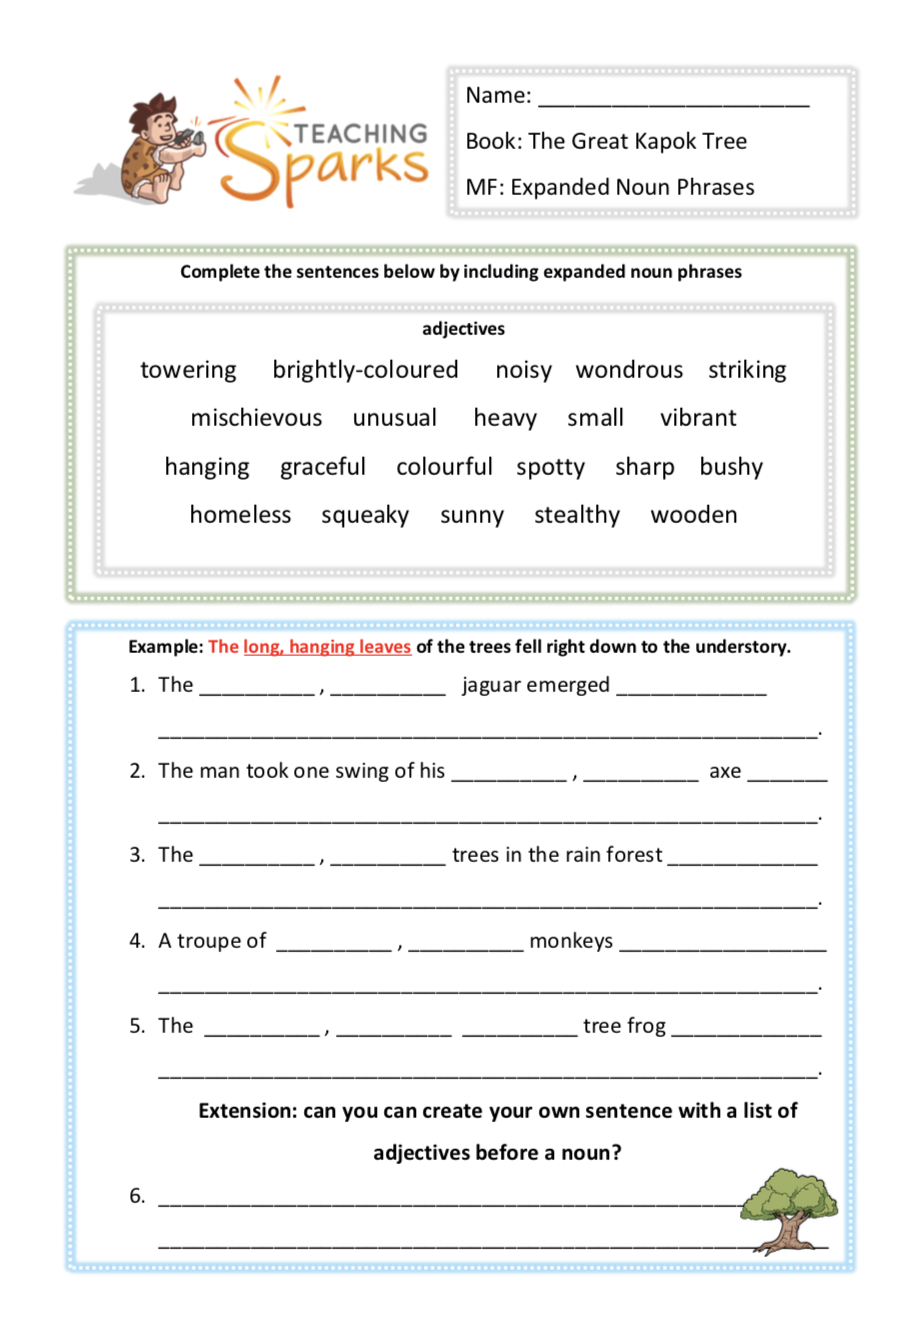 The Great Kapok Tree Lower KS2 Literacy Resources And Worksheets